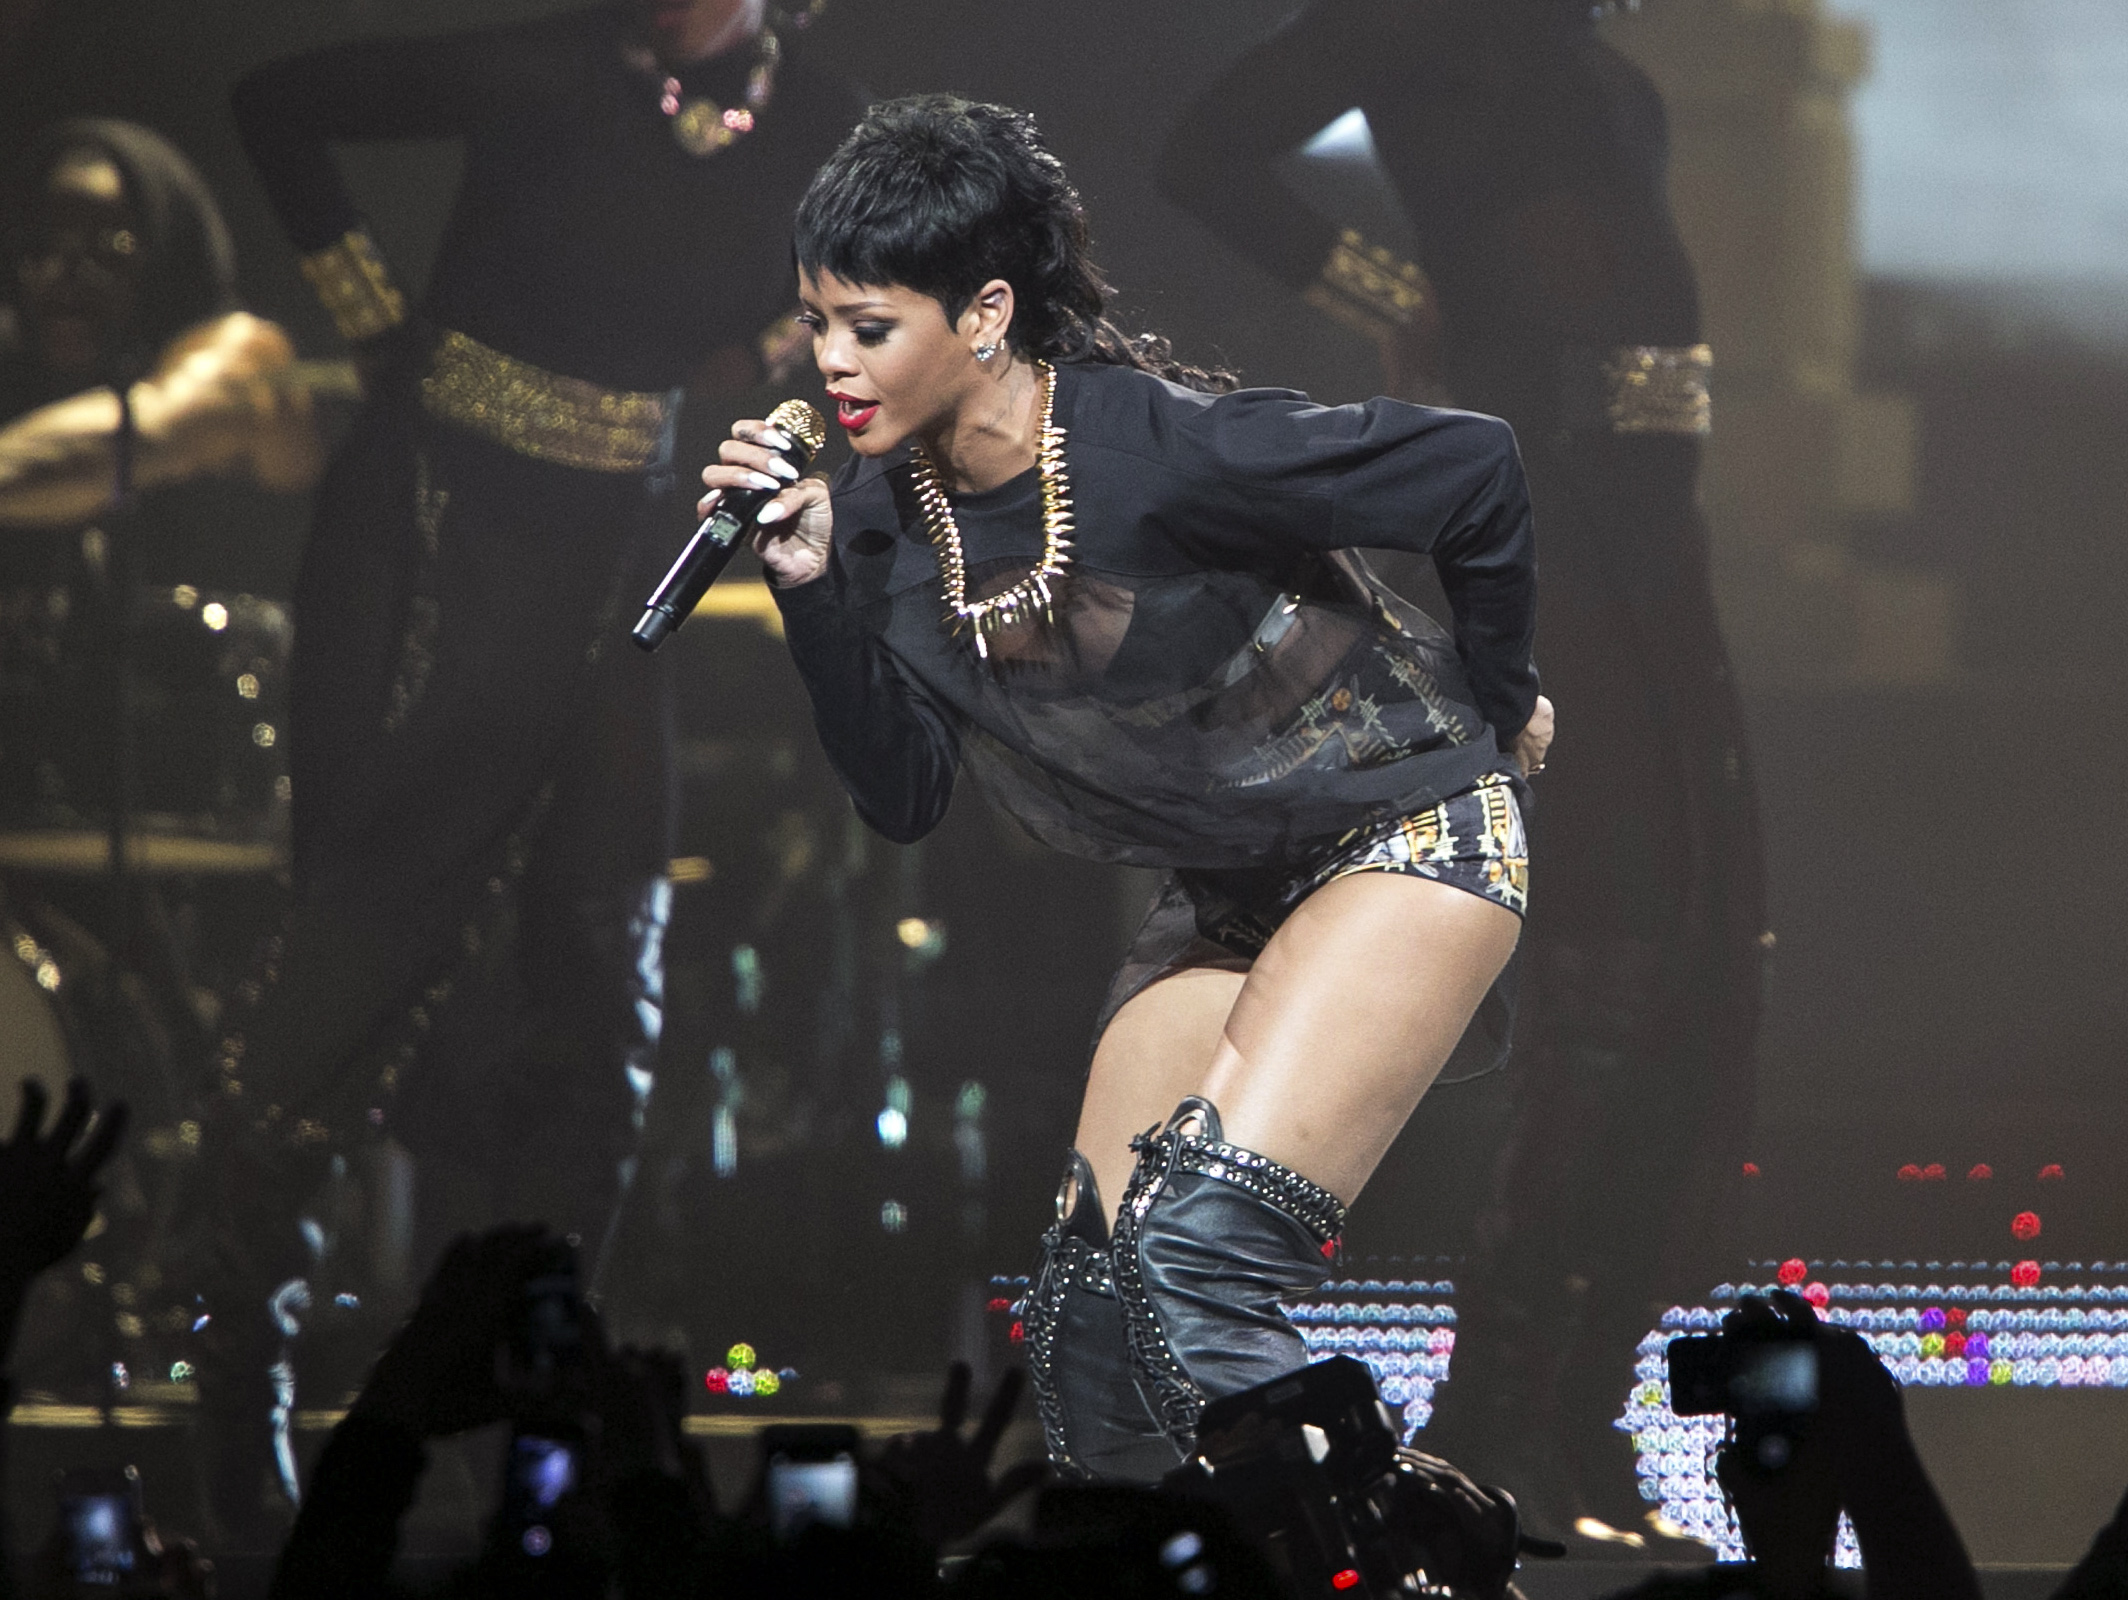 Thai authorities arrested a bar owner in connection with a lewd sex show mentioned in tweets by Rihanna during her recent trip to Thailand. Photo: AP